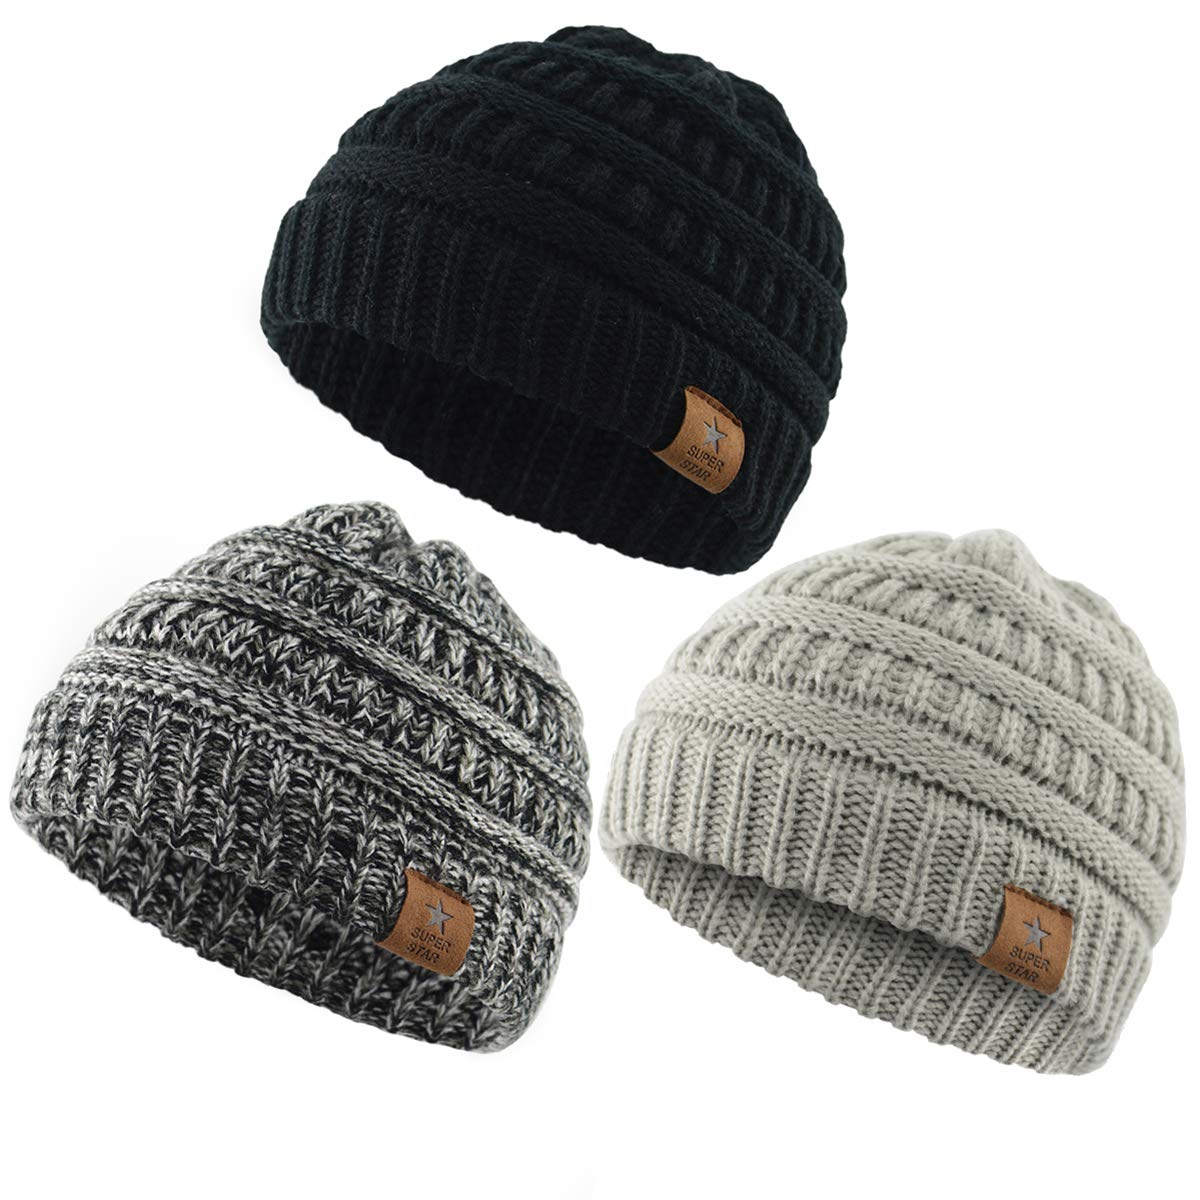 Zando Baby Beanies Infant Toddler Winter Hat Soft Warm Knit Hats Caps for Boys